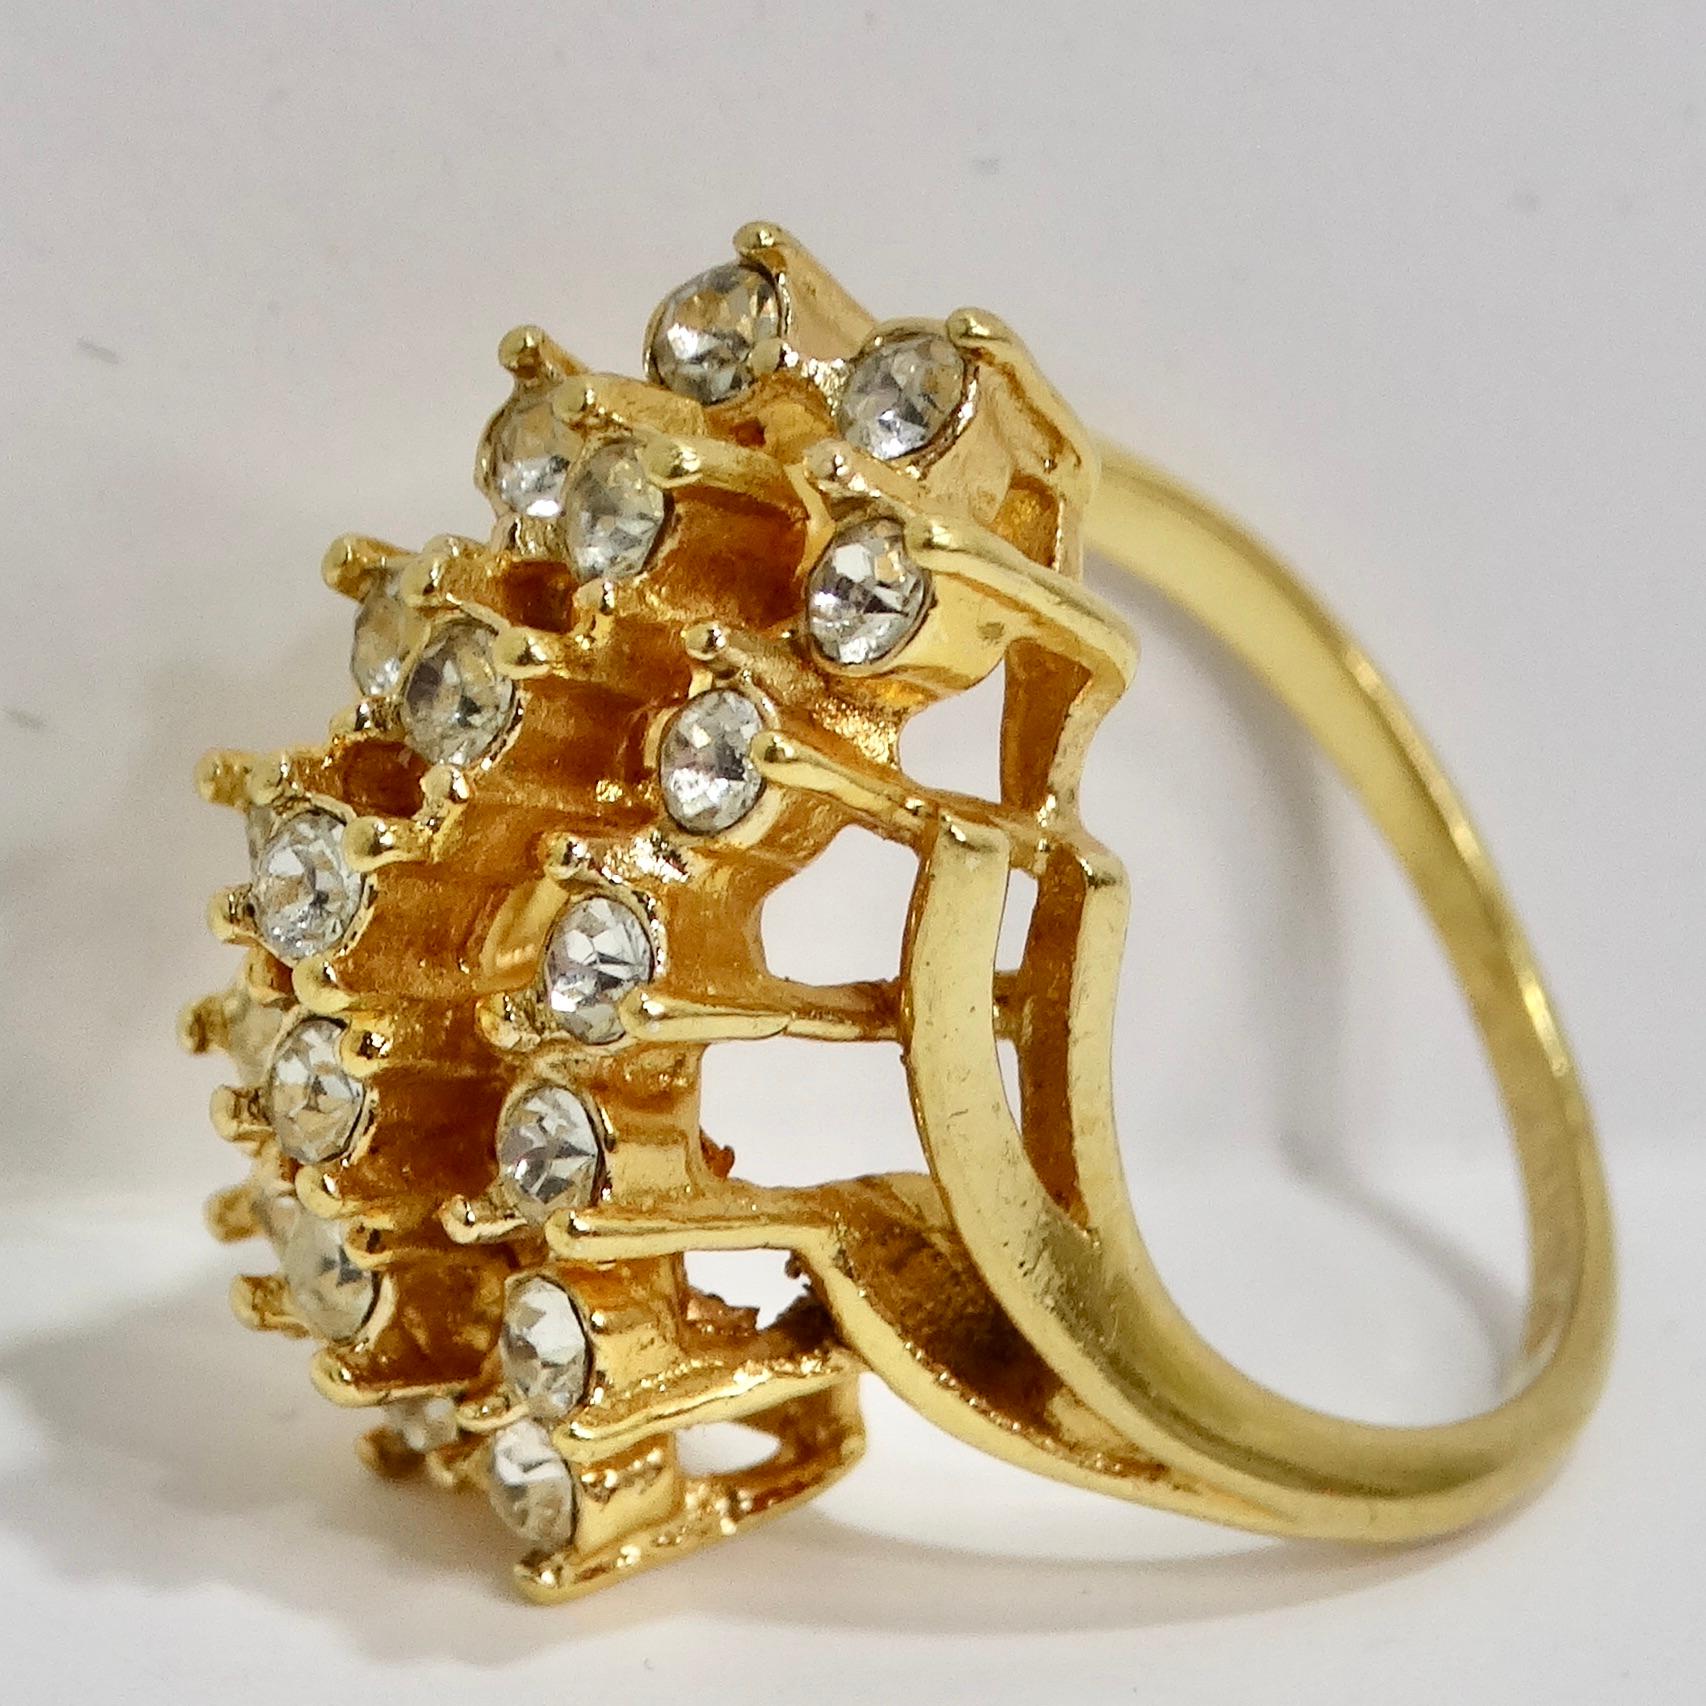 Unleash the glamour of the 1960s with our exquisite Gold Plated Rhinestone Ring. This stunning cluster statement ring is a testament to timeless elegance and the art of making a glamorous statement. Encrusted with a plethora of round clear